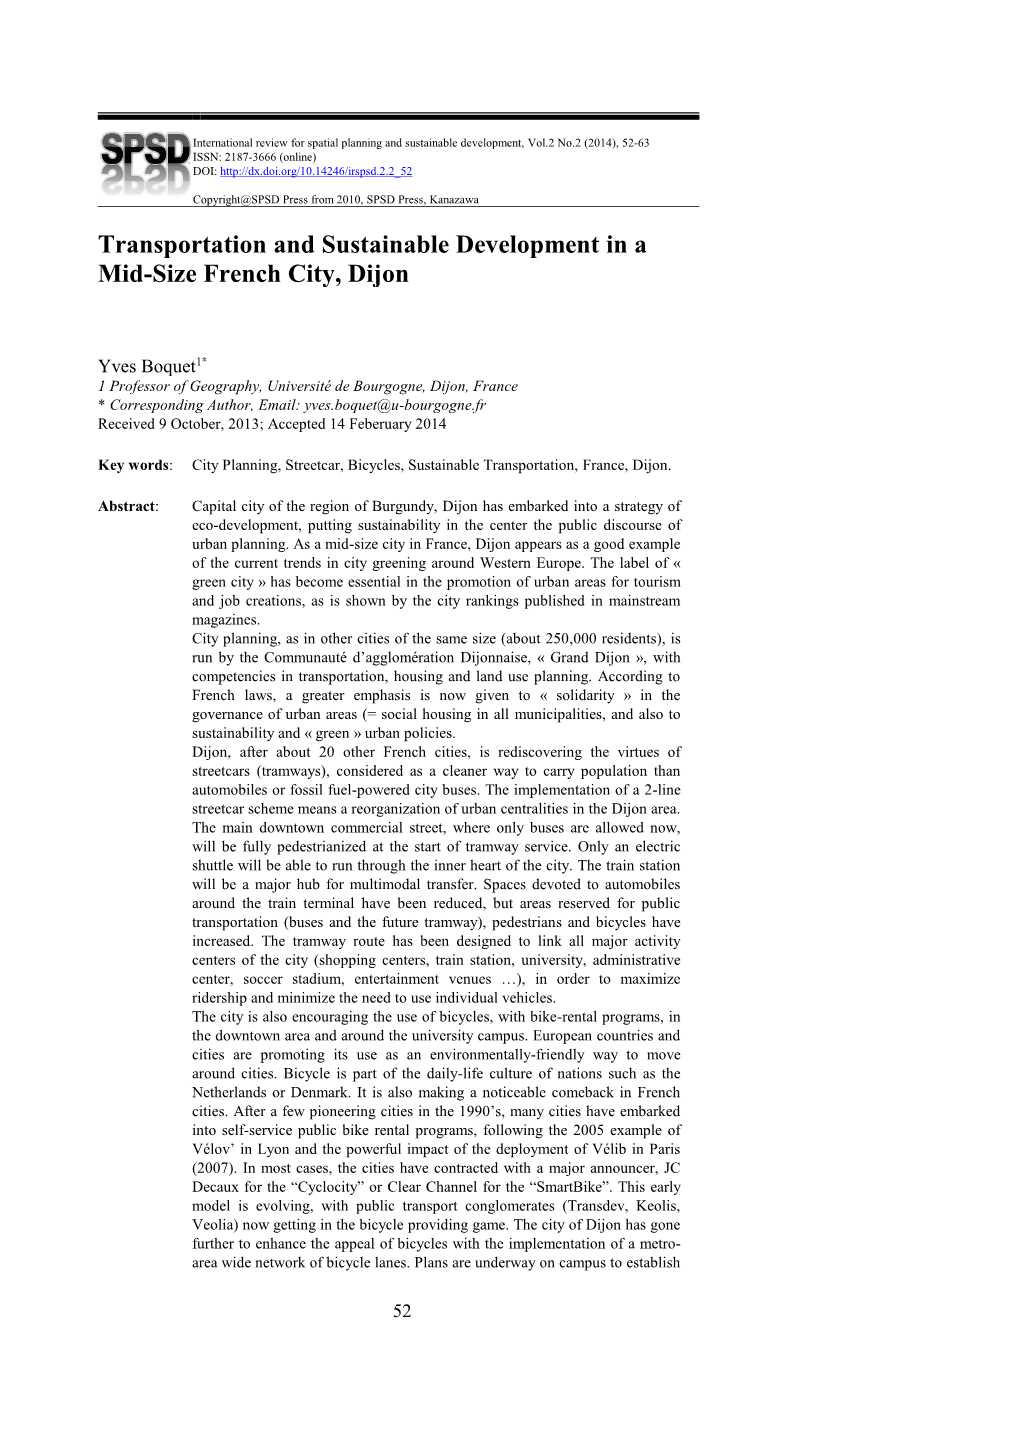 Transportation and Sustainable Development in a Mid-Size French City, Dijon